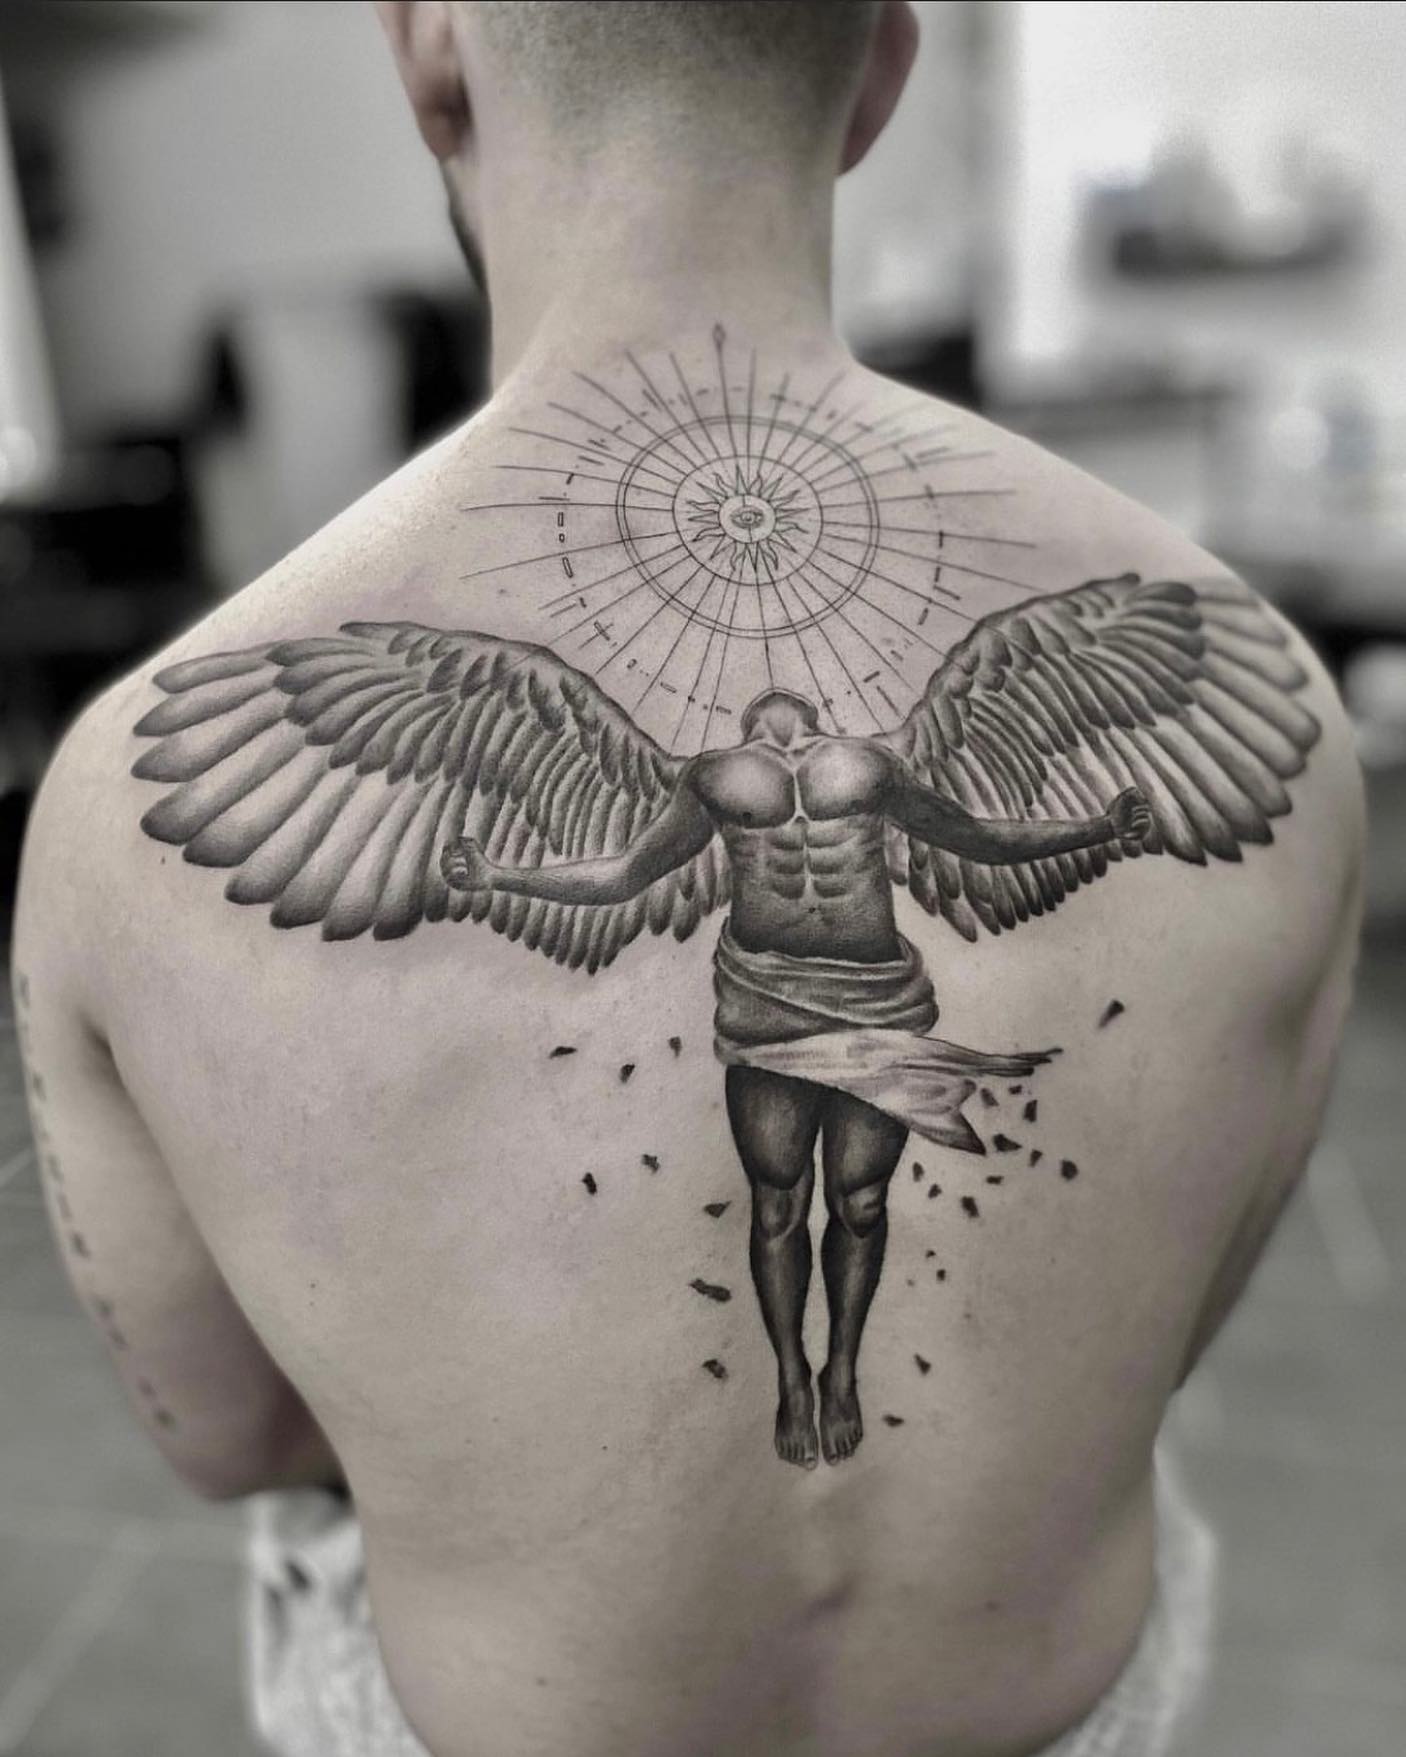 60 Icarus Tattoo Designs For Men  Manly Greek Mythology Ideas  Icarus  tattoo Tattoo designs men Forearm tattoo design